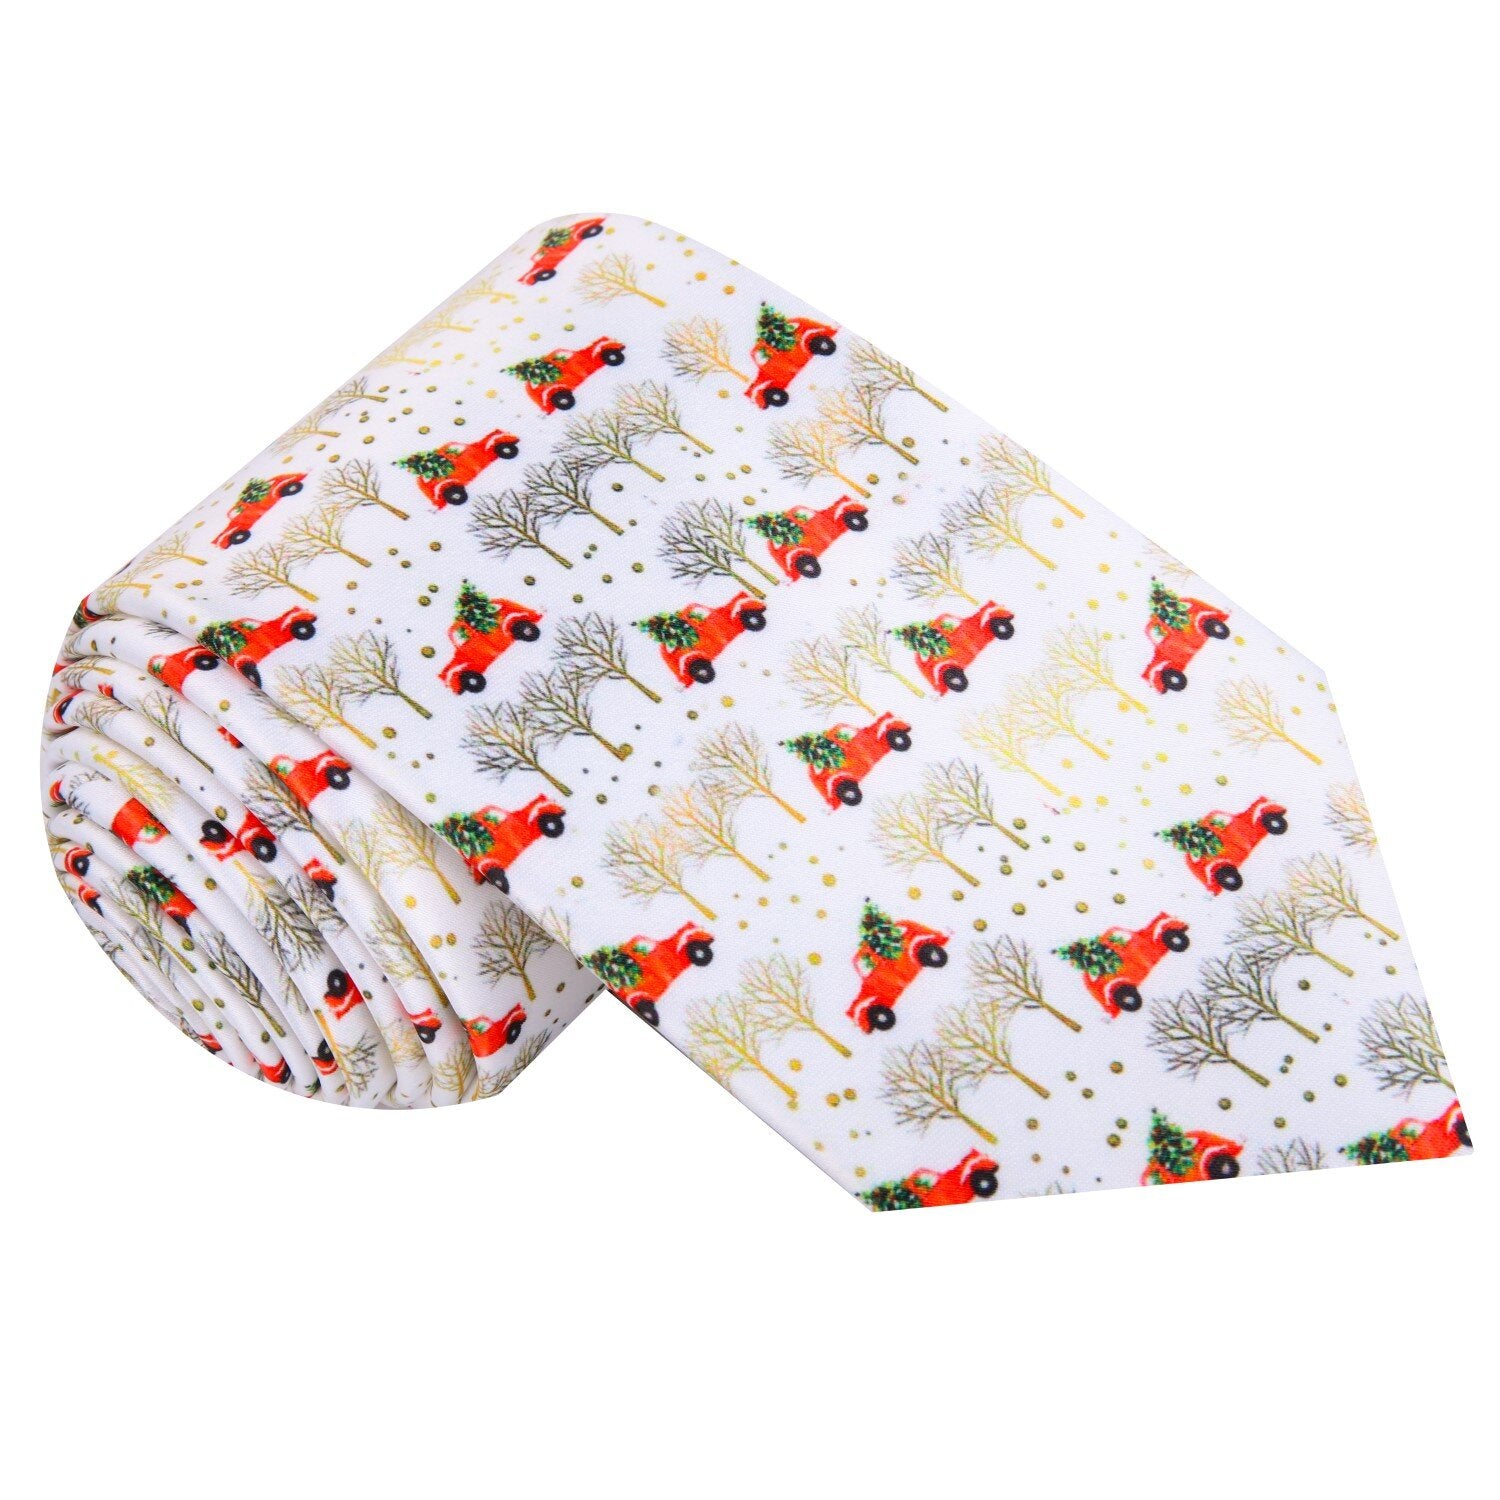 White, Red, Green, Gold Car Carrying Christmas Tree Tie